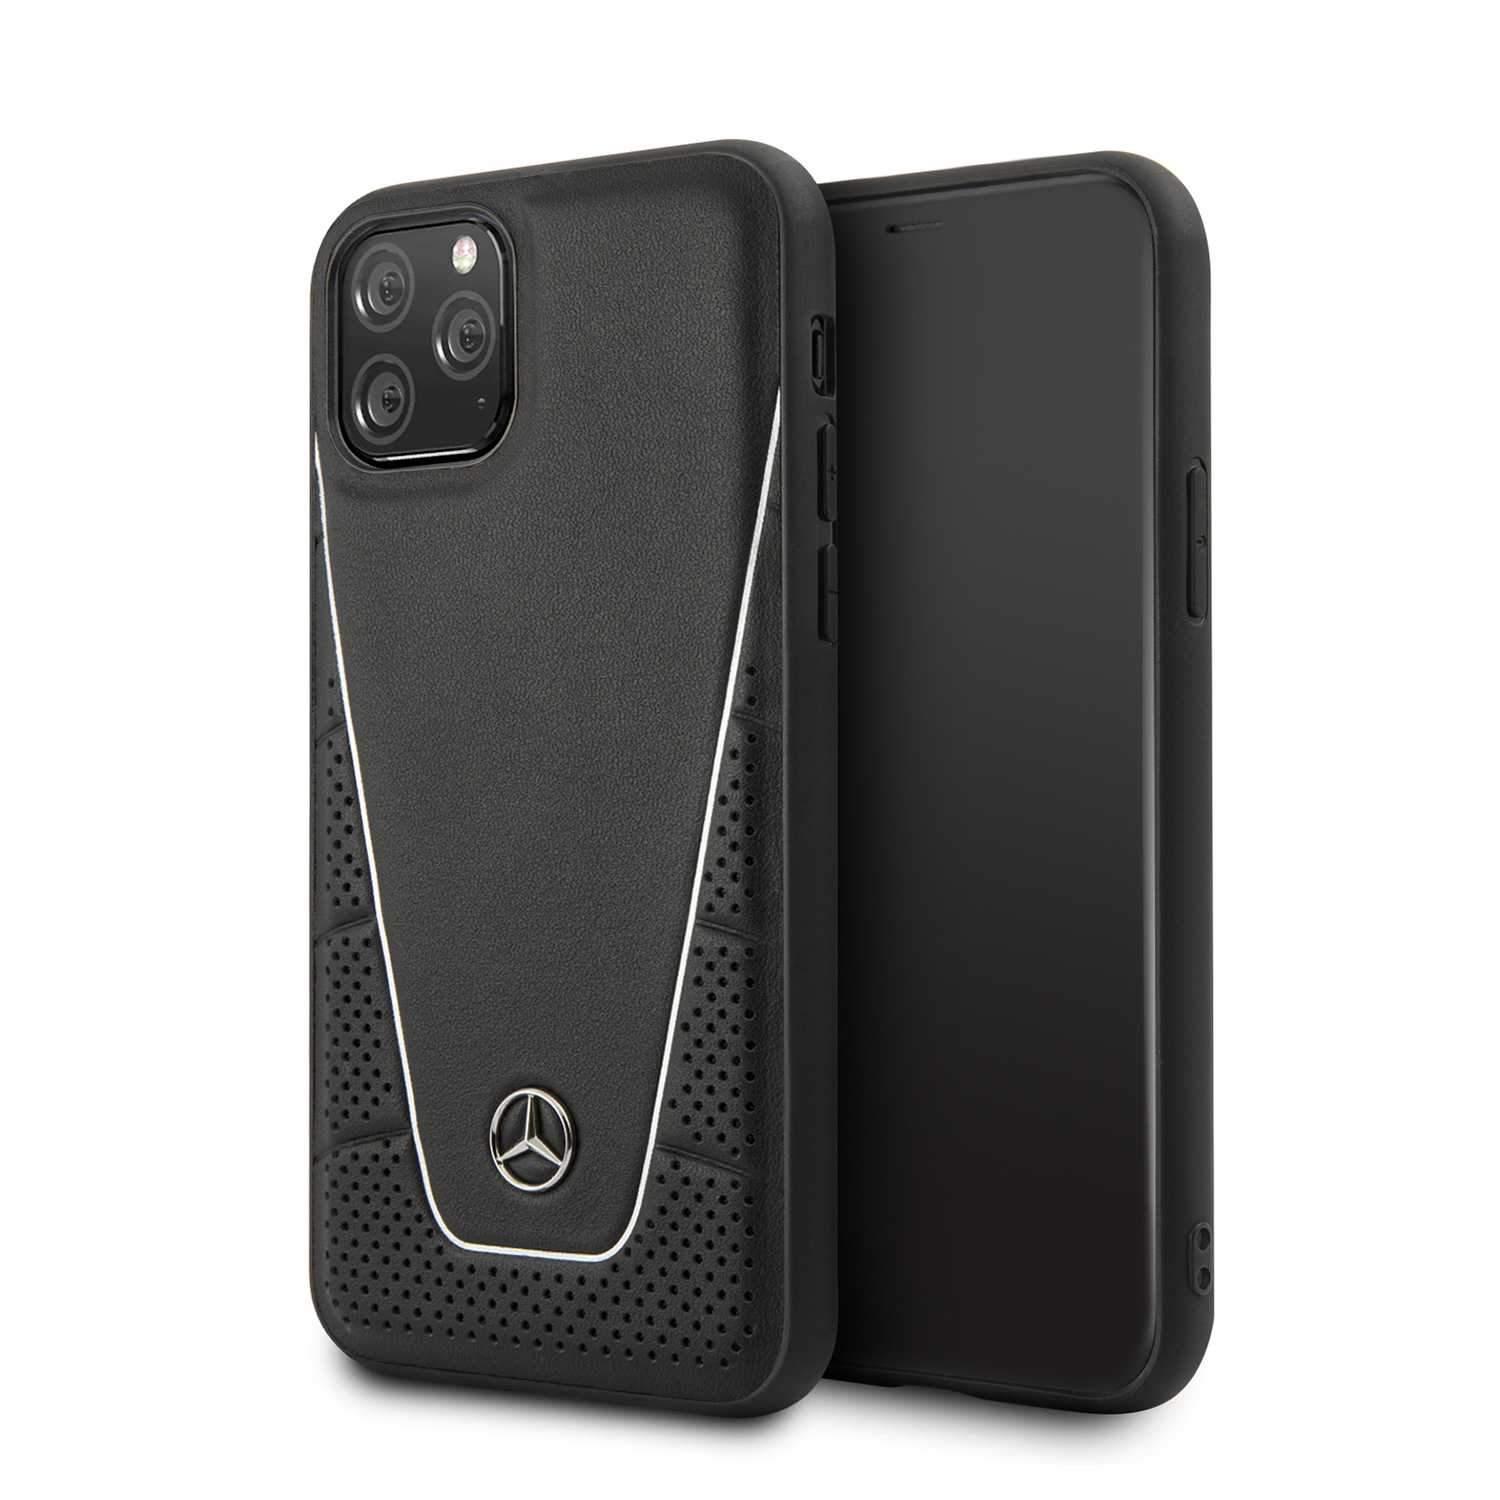 Mercedes-Benz mercedes benz quilted and smooth leather case for iphone 11 pro black